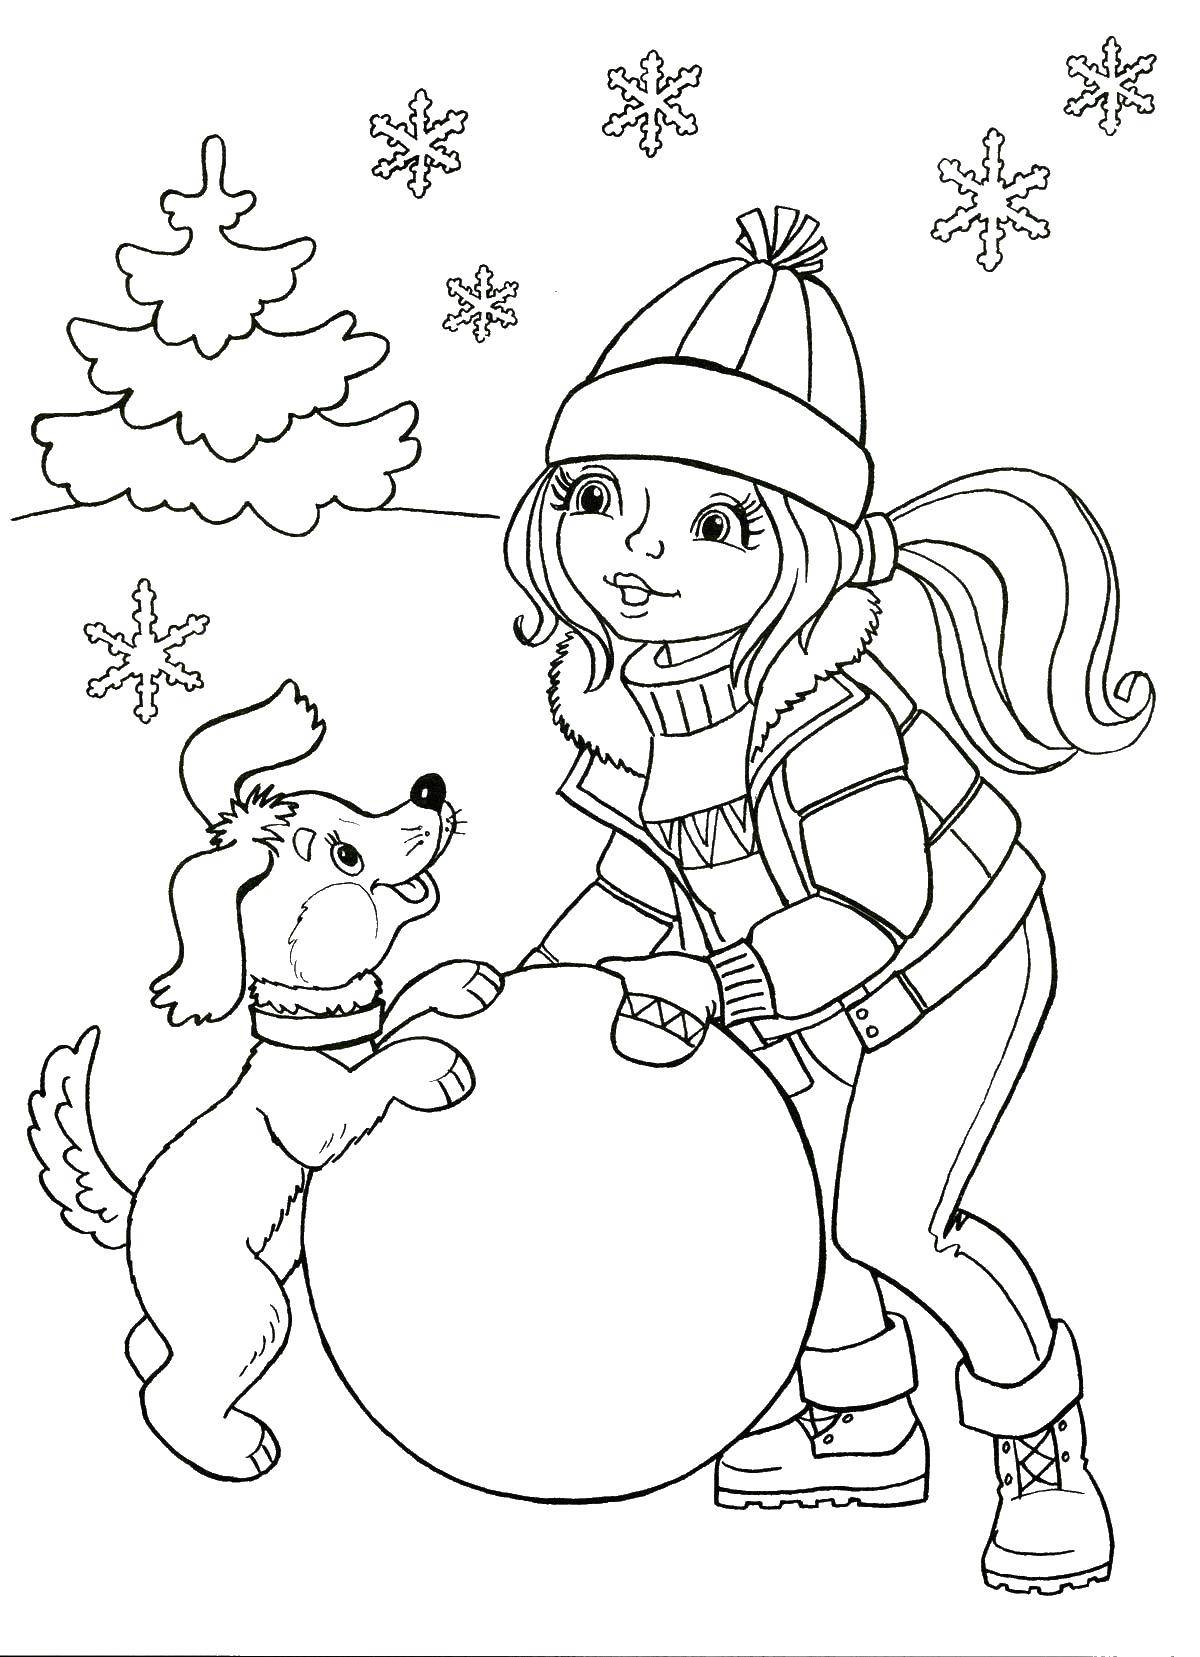 Coloring Girl and dog make a snowman. Category winter. Tags:  winter, snow, snowman, girl.